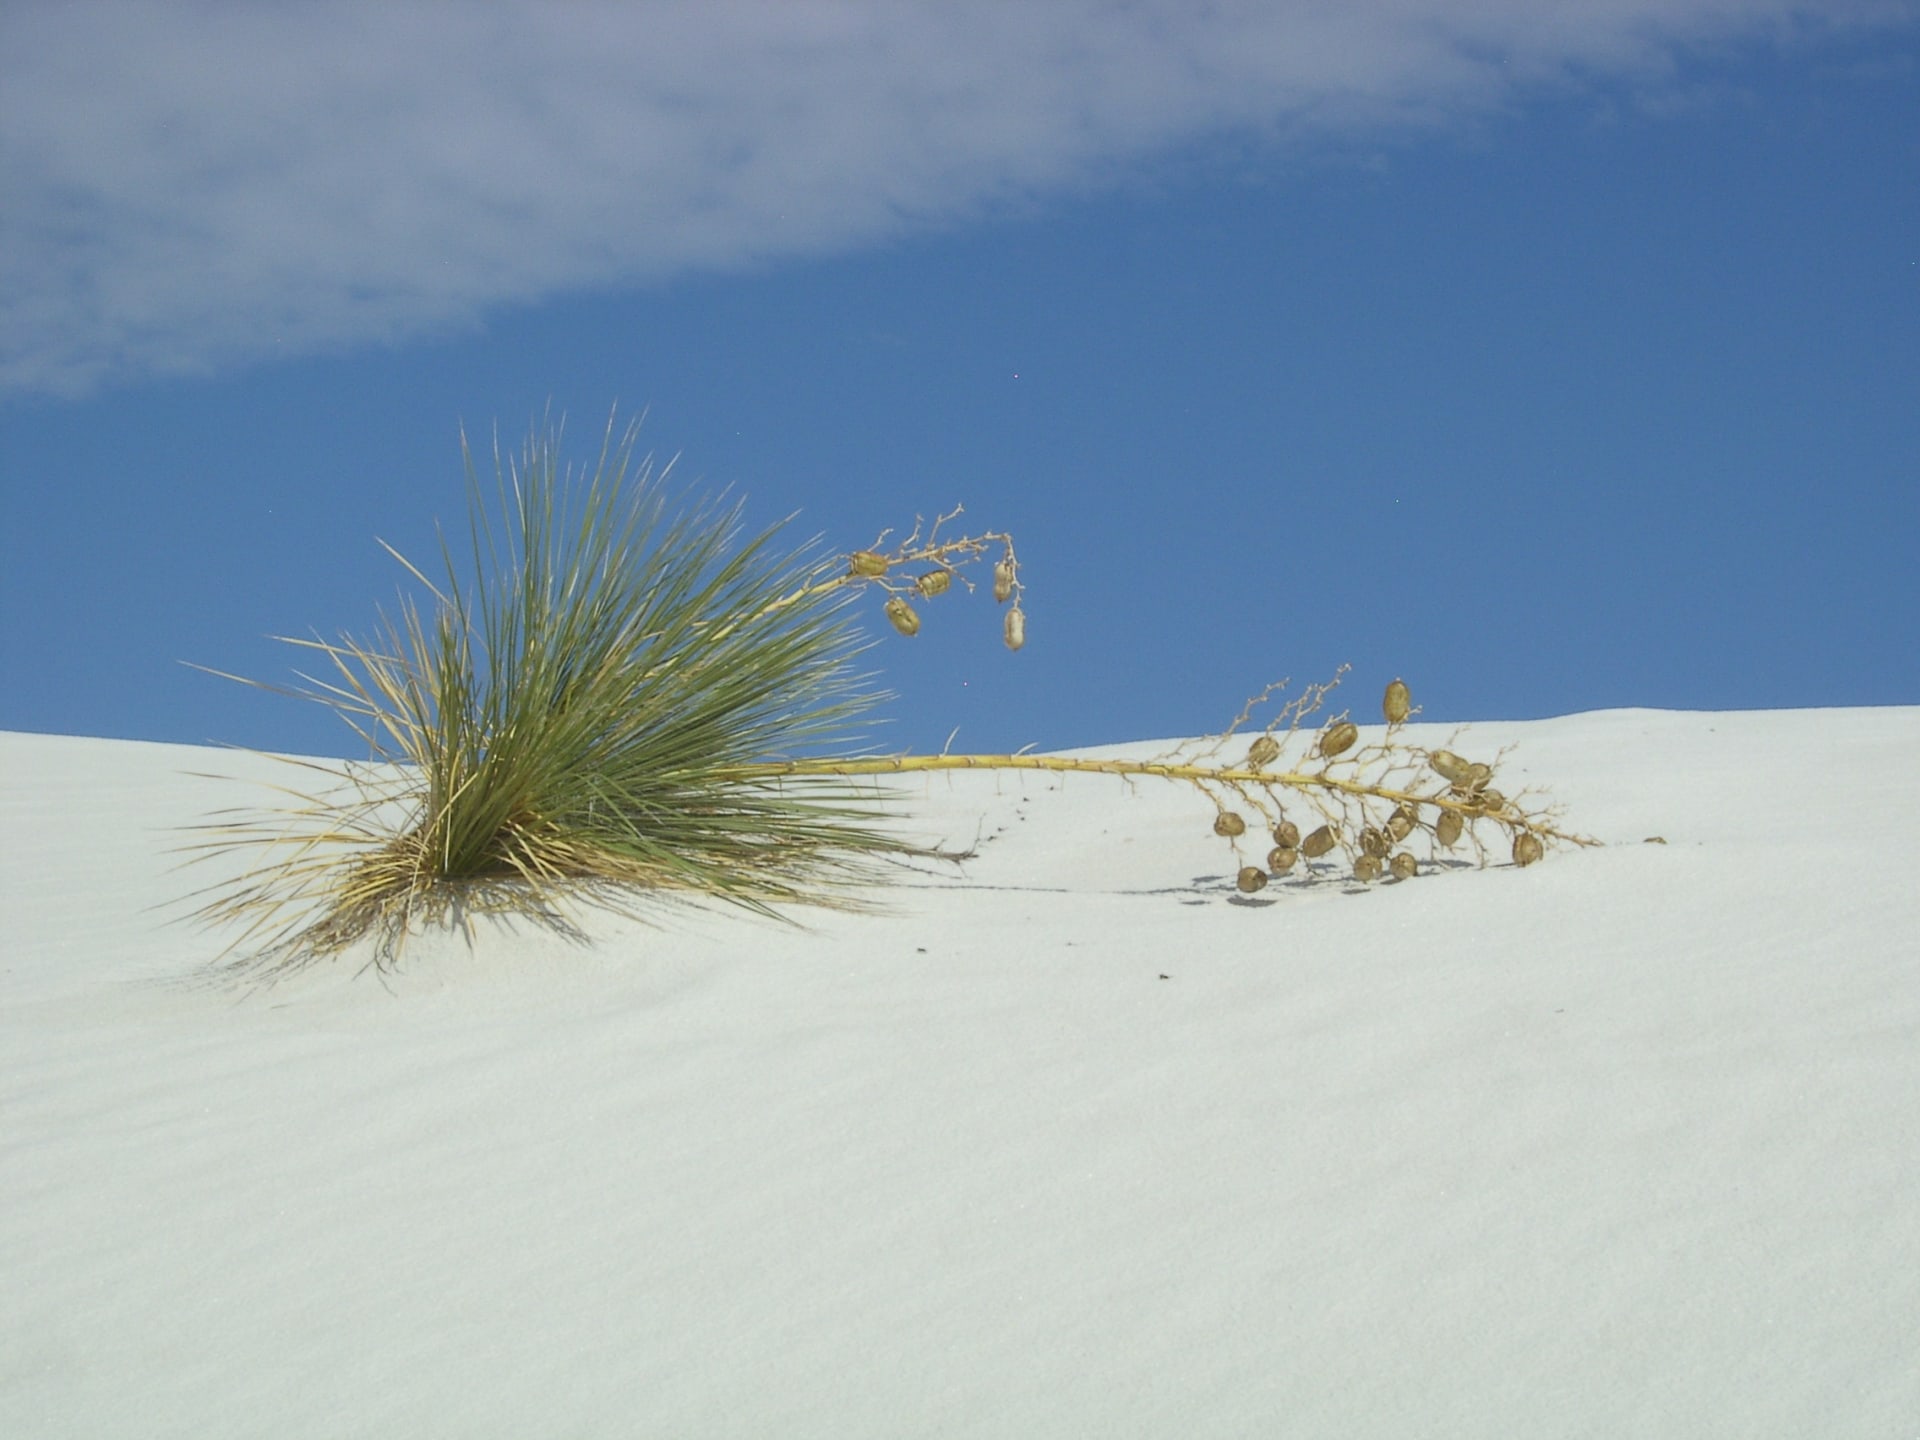 The White Sands National Monument...Just a few miles to the west, but you can see the dunes from the place...